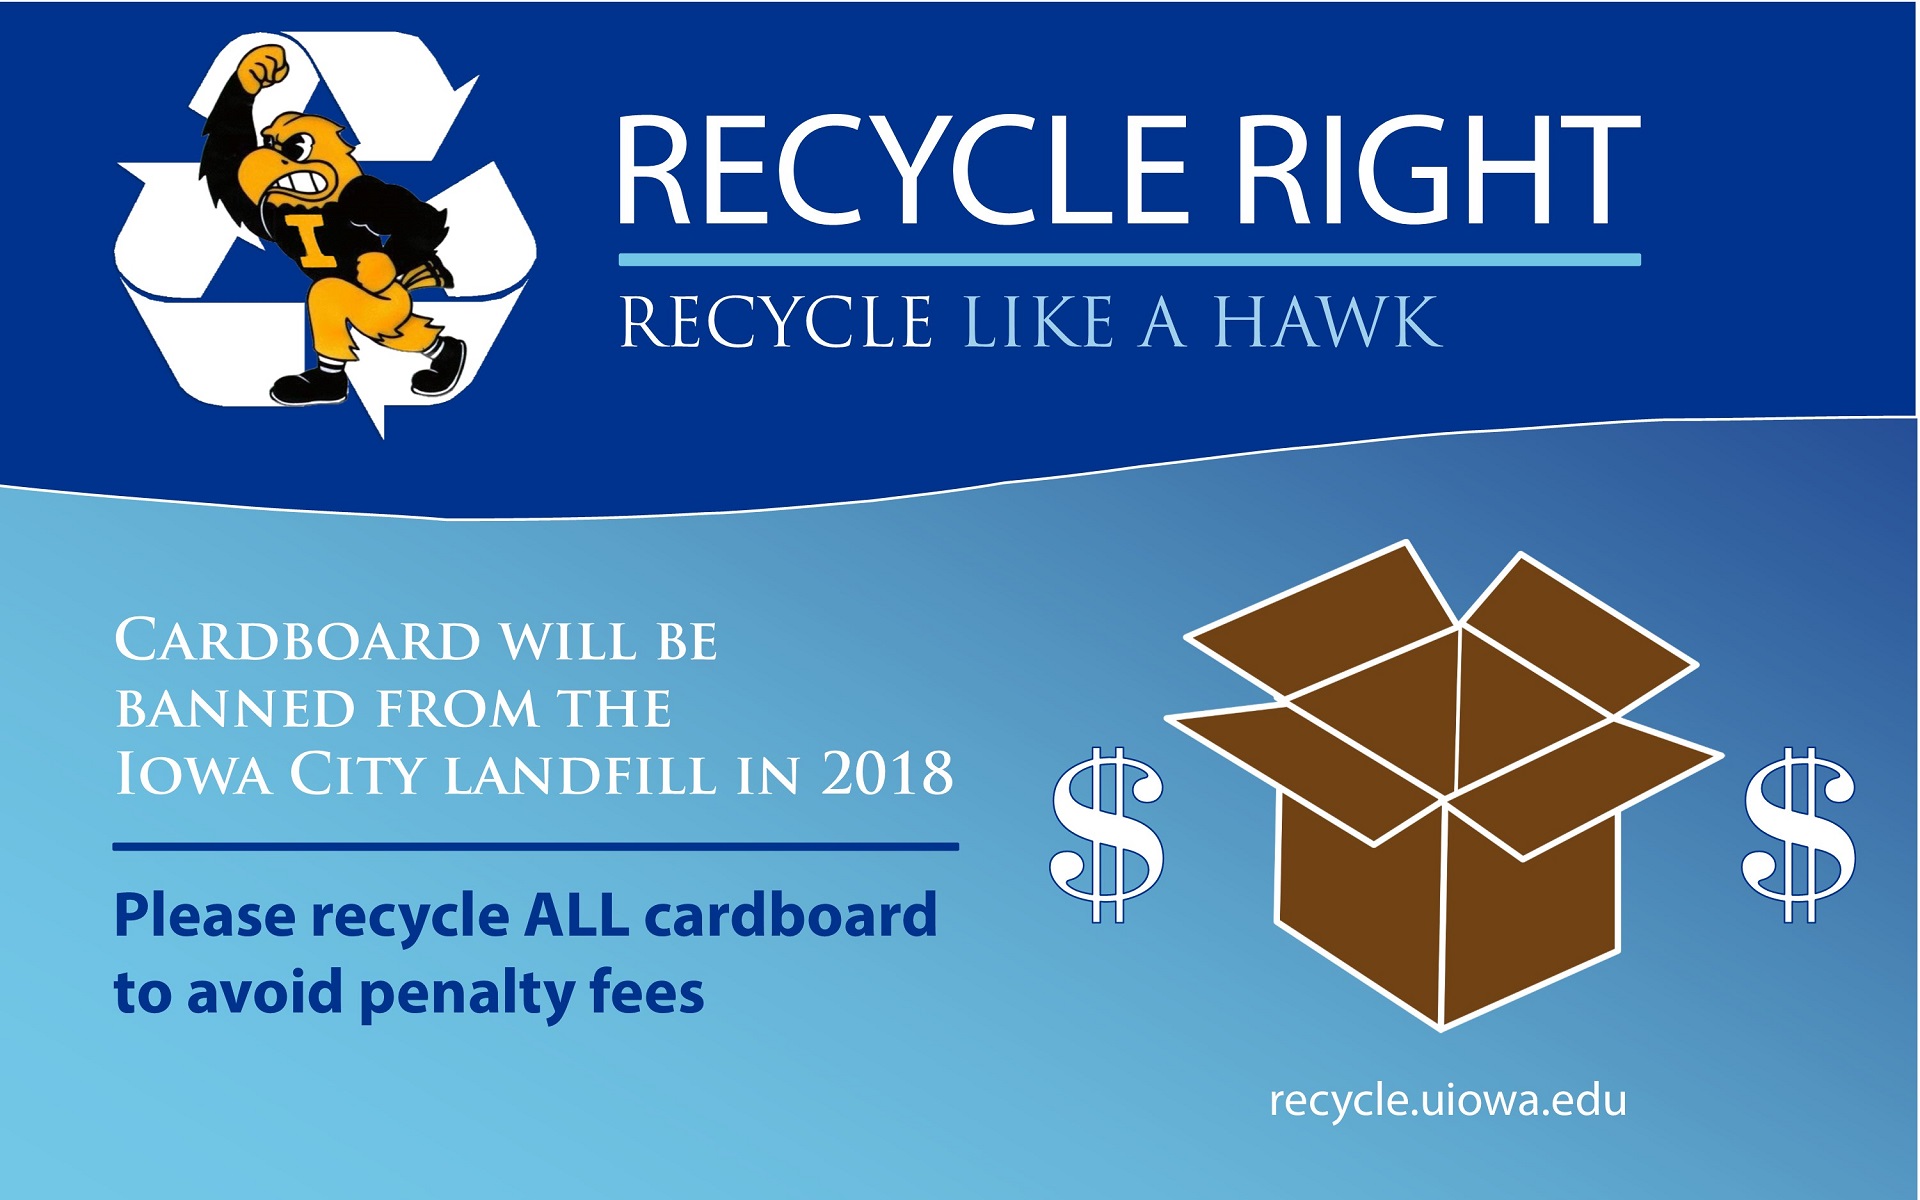 Recycle like a Hawk - more information recycle.uiowa.edu - Cardboard will be banned from the Iowa City landfill in 2018. Please recycle ALL cardboard to avoid penalty fees.